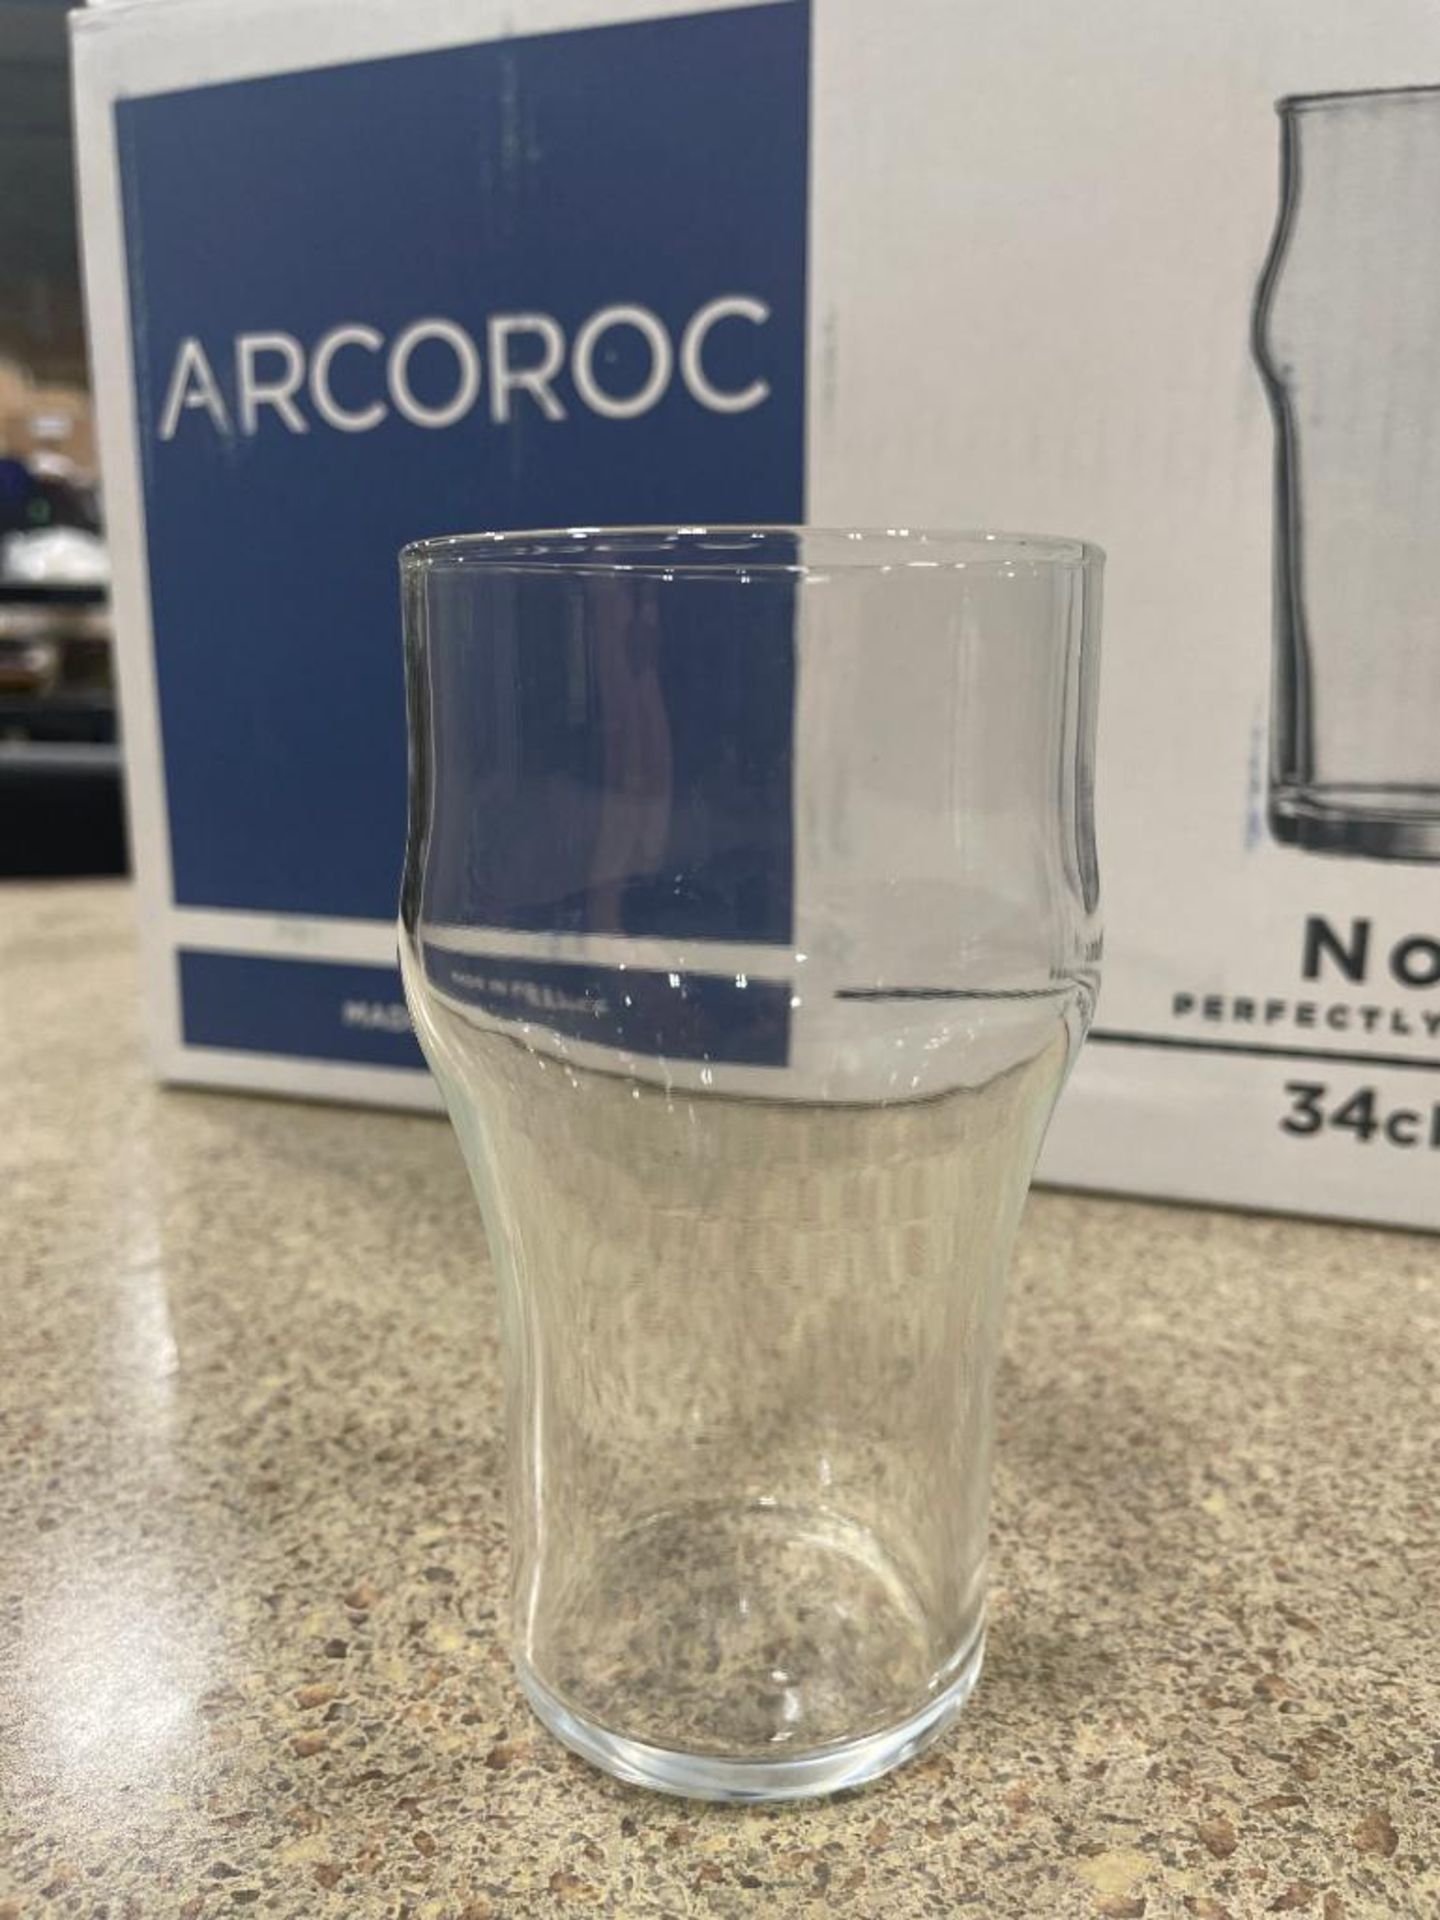 2 CASES OF 12OZ NONIC BEER GLASS, ARCOROC 43740 - 24 PER CASE - Image 14 of 14